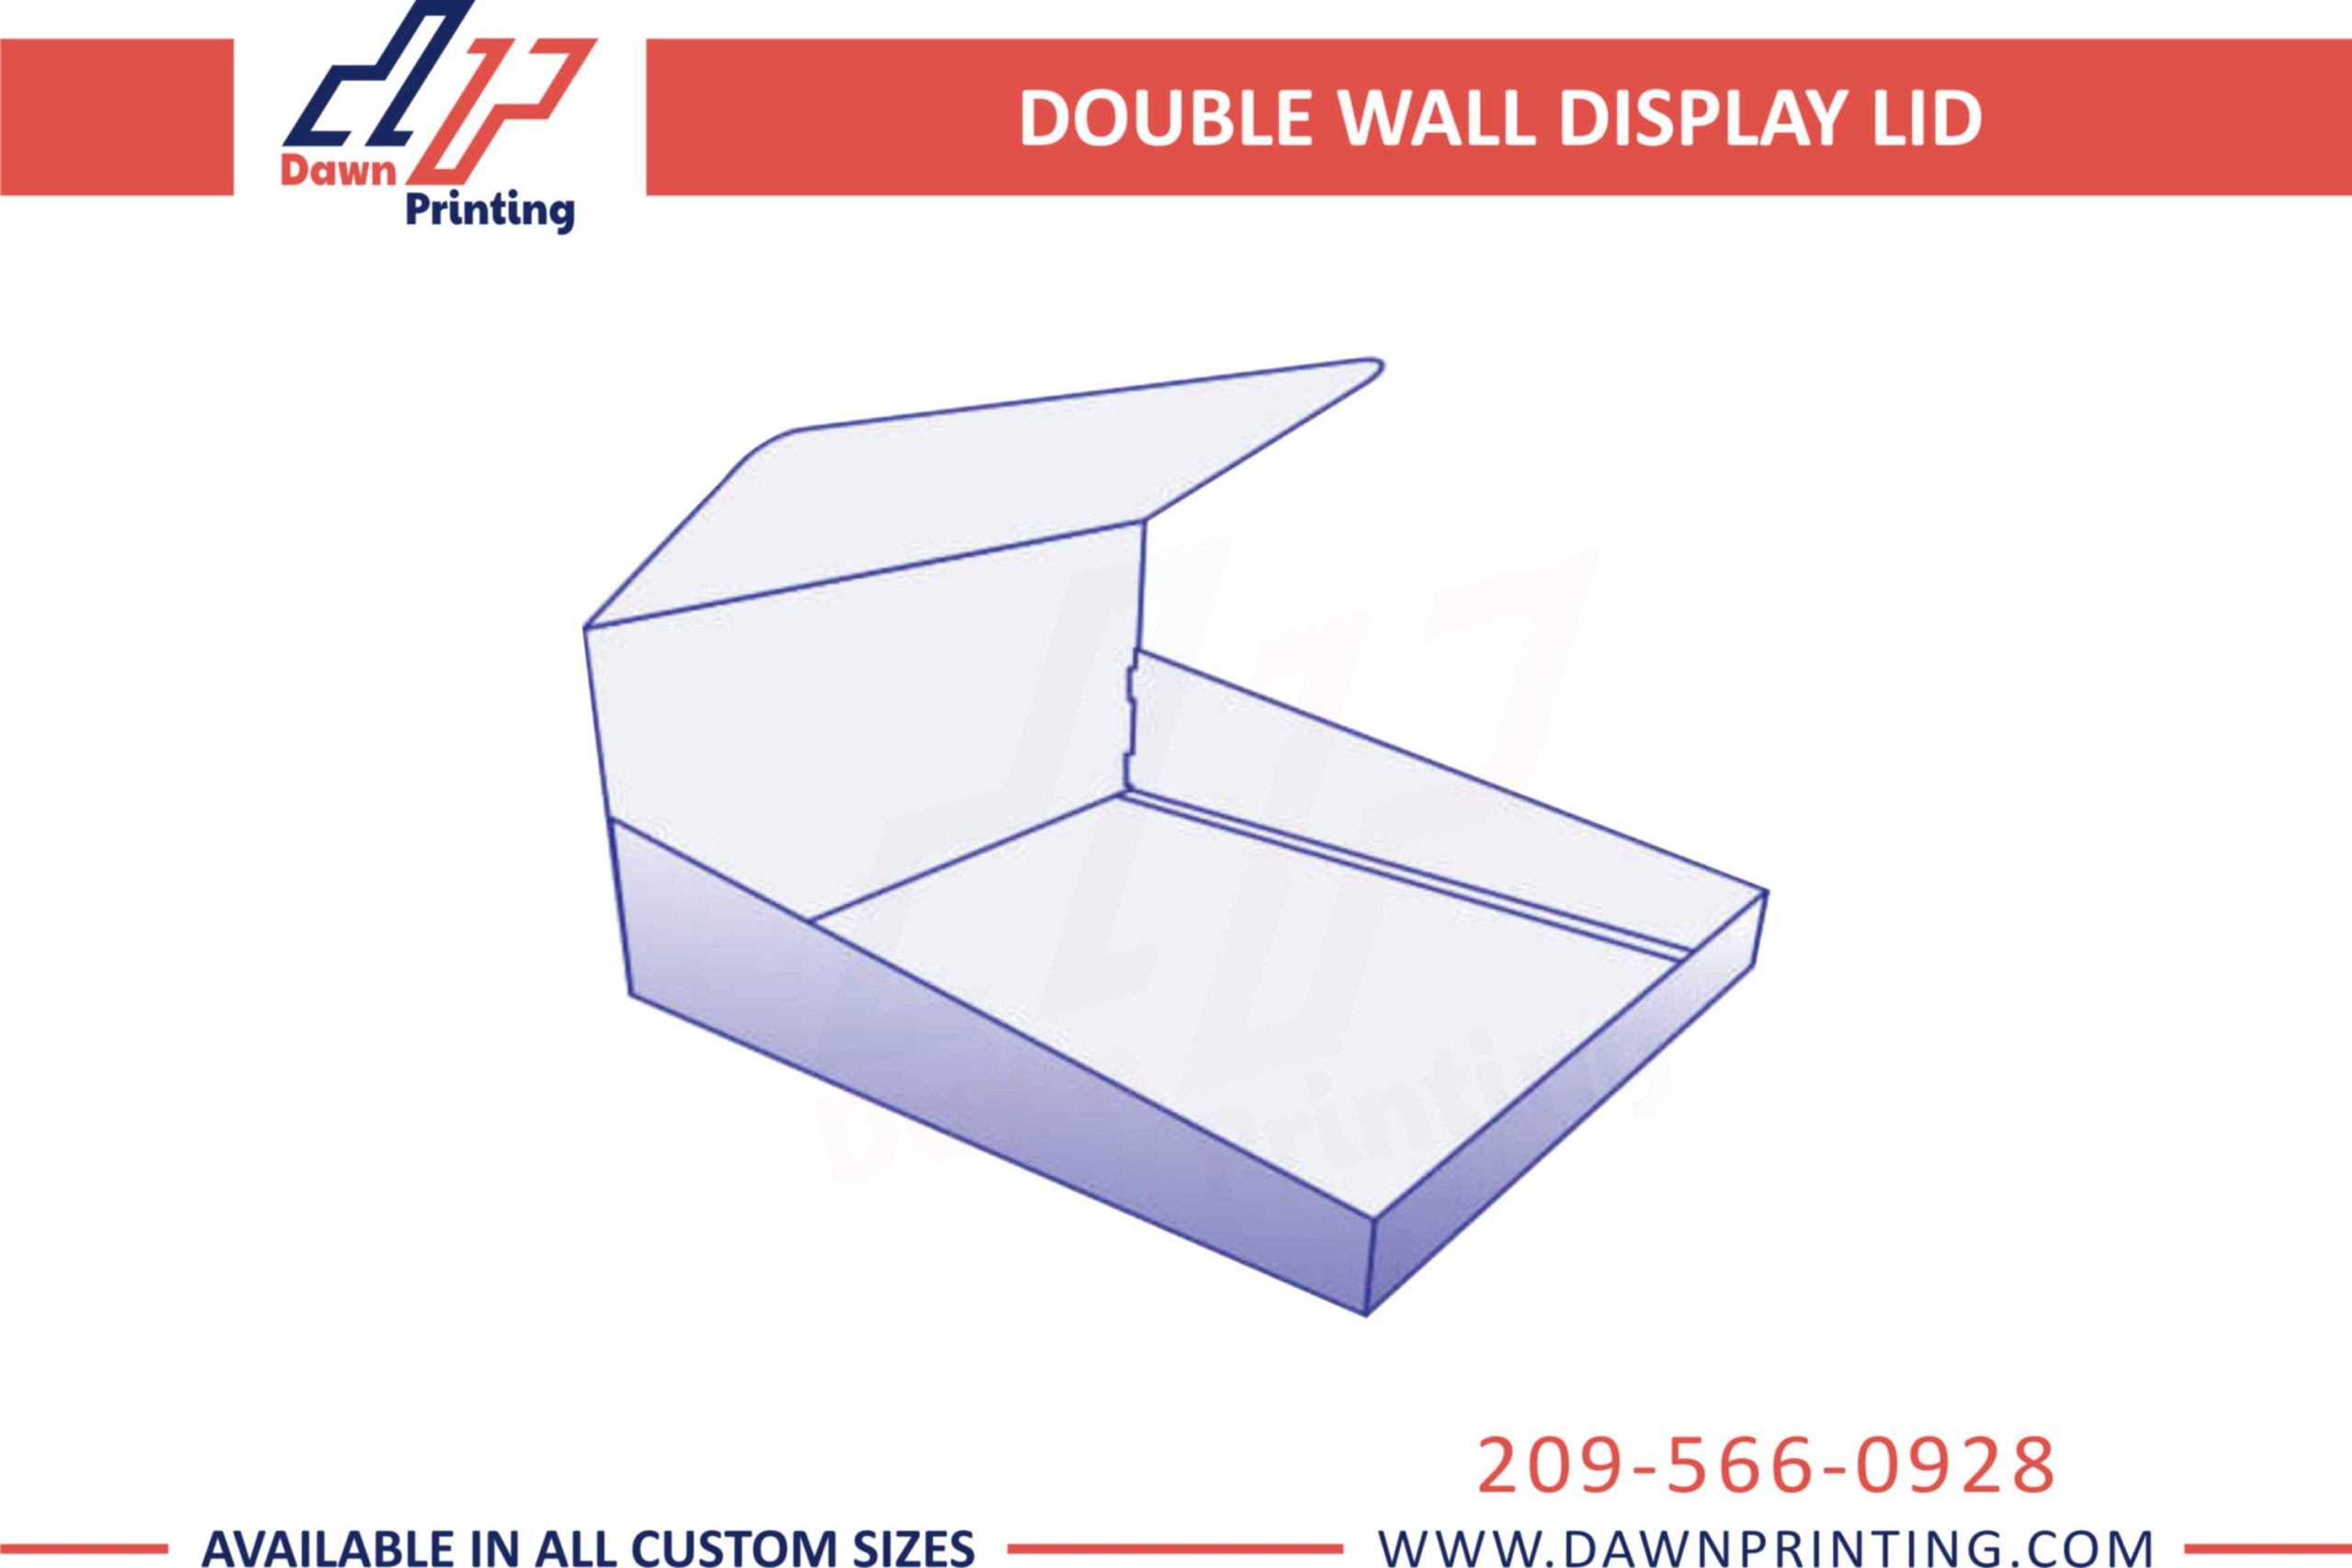 Wholesale Custom Printed Double wall With Display Lid - Dawn Printing